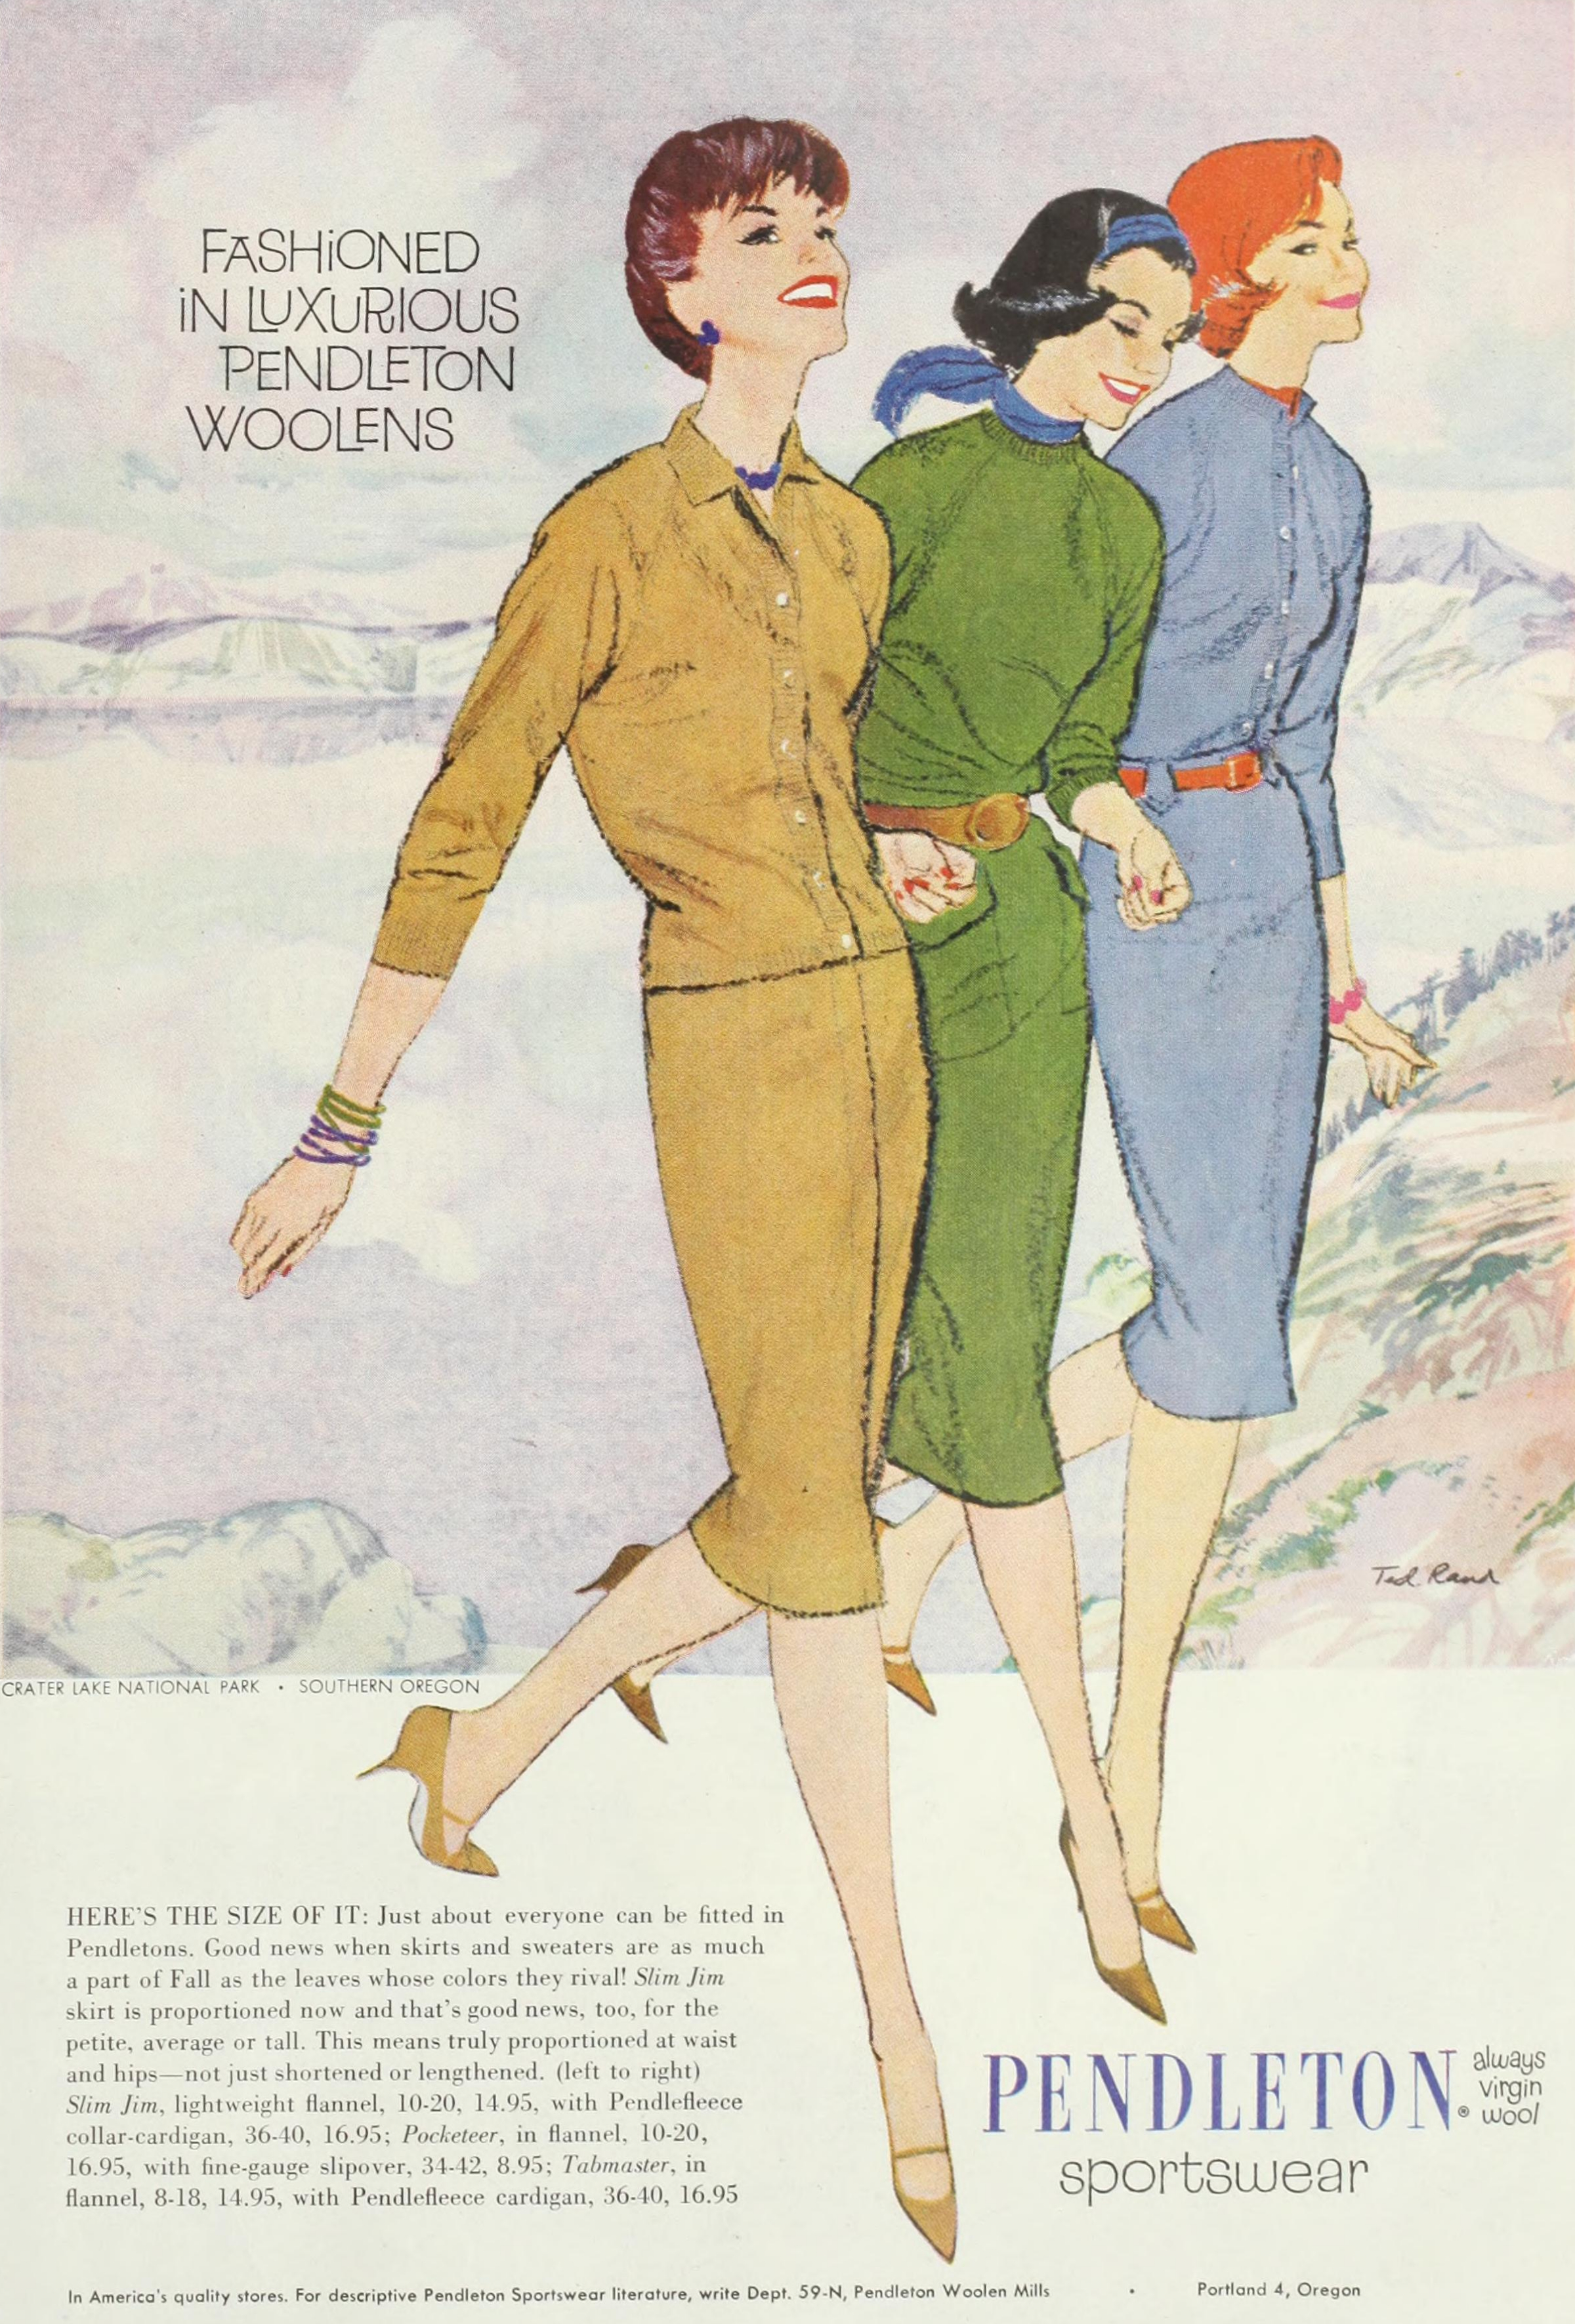 Pendleton Sportswear - published in Ladies' Home Journal - October 1959 - Illustration by Ted Rand